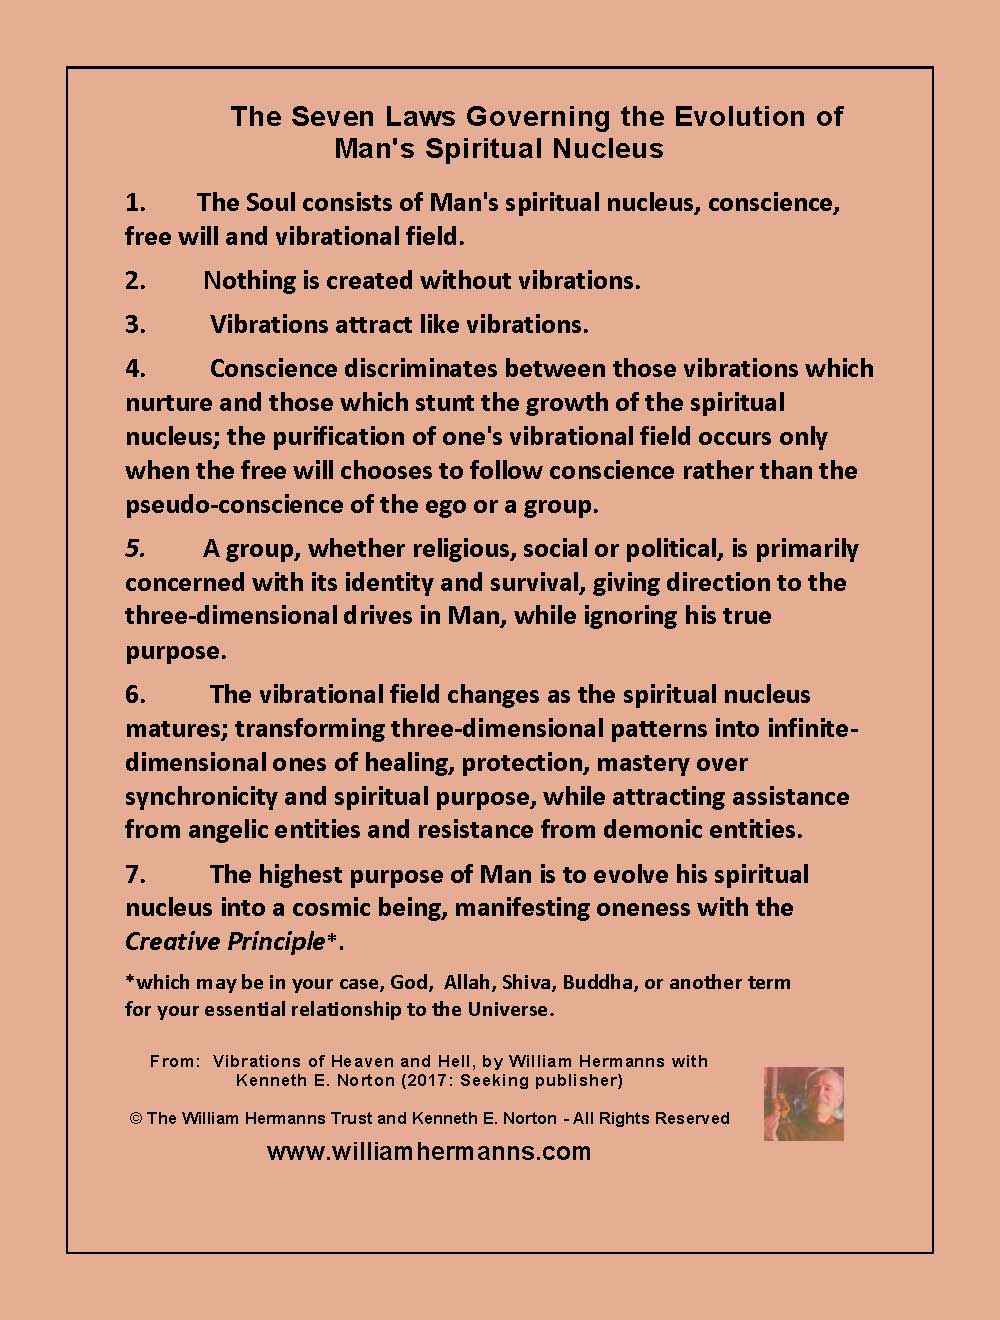 The Seven Laws Governing the Evolution of Man's Spiritual Nucleus - from Vibrations of Heaven and Hell by William Hermanns with Kenneth Norton